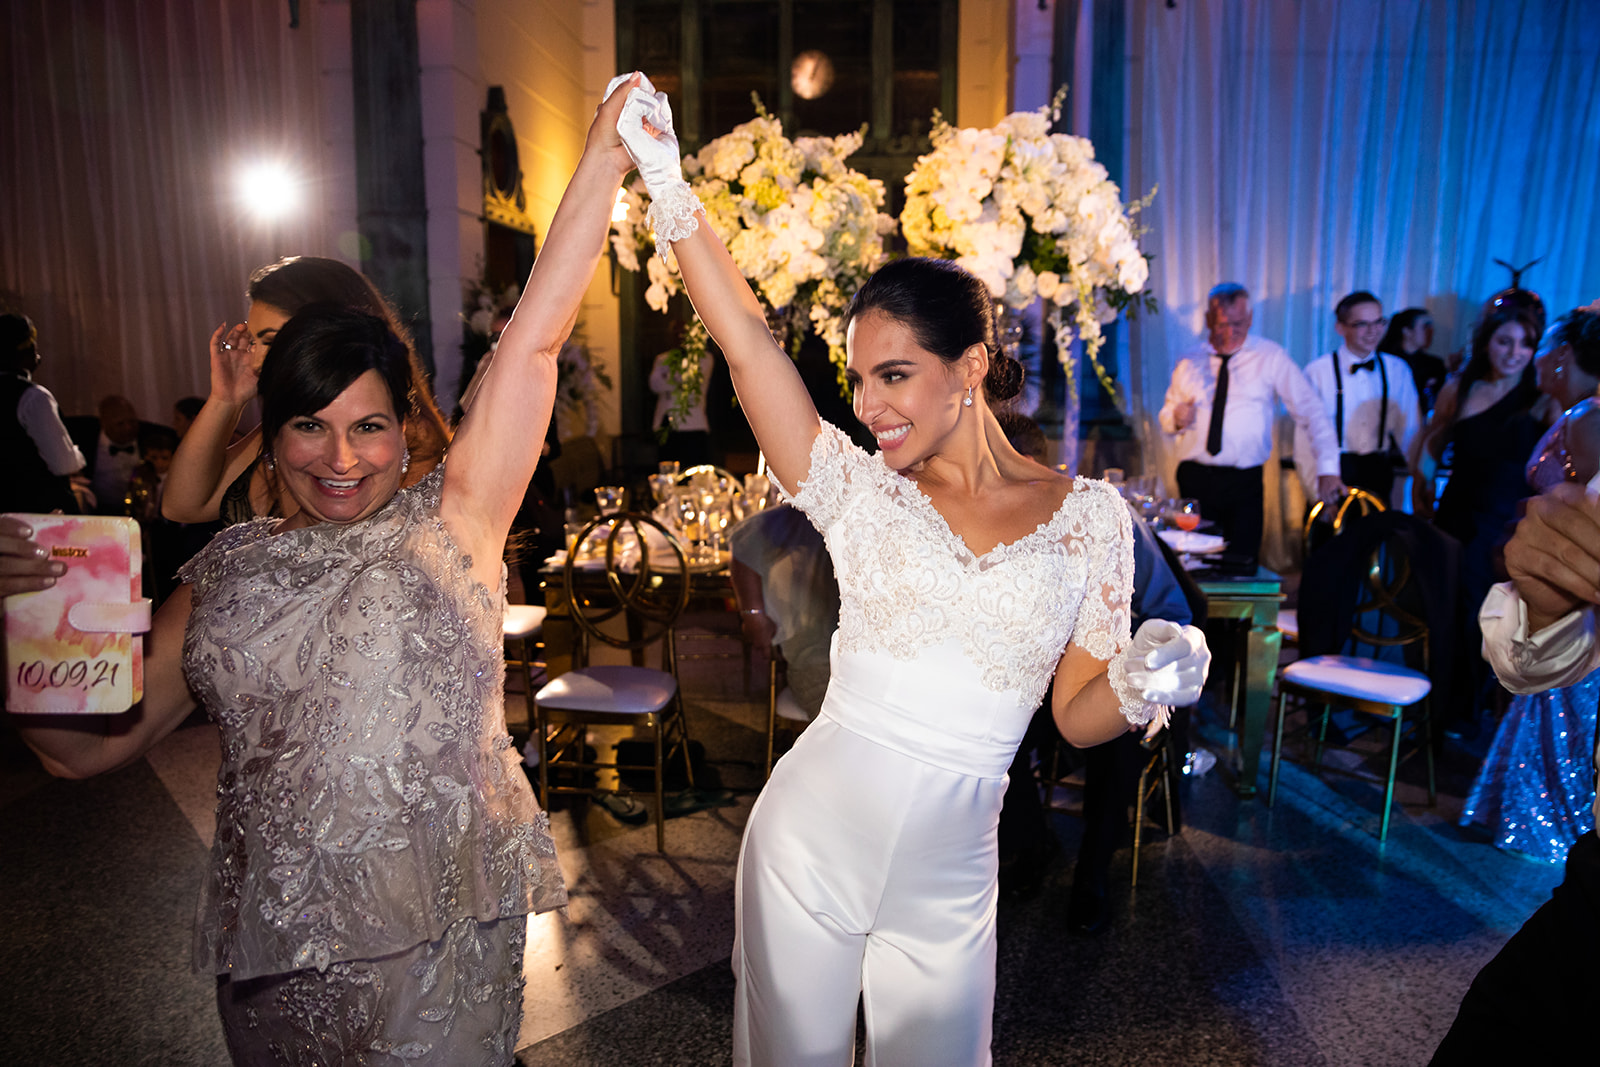 unique wedding: Alexa's Sentimental Jumpsuit made from her mother's wedding dress